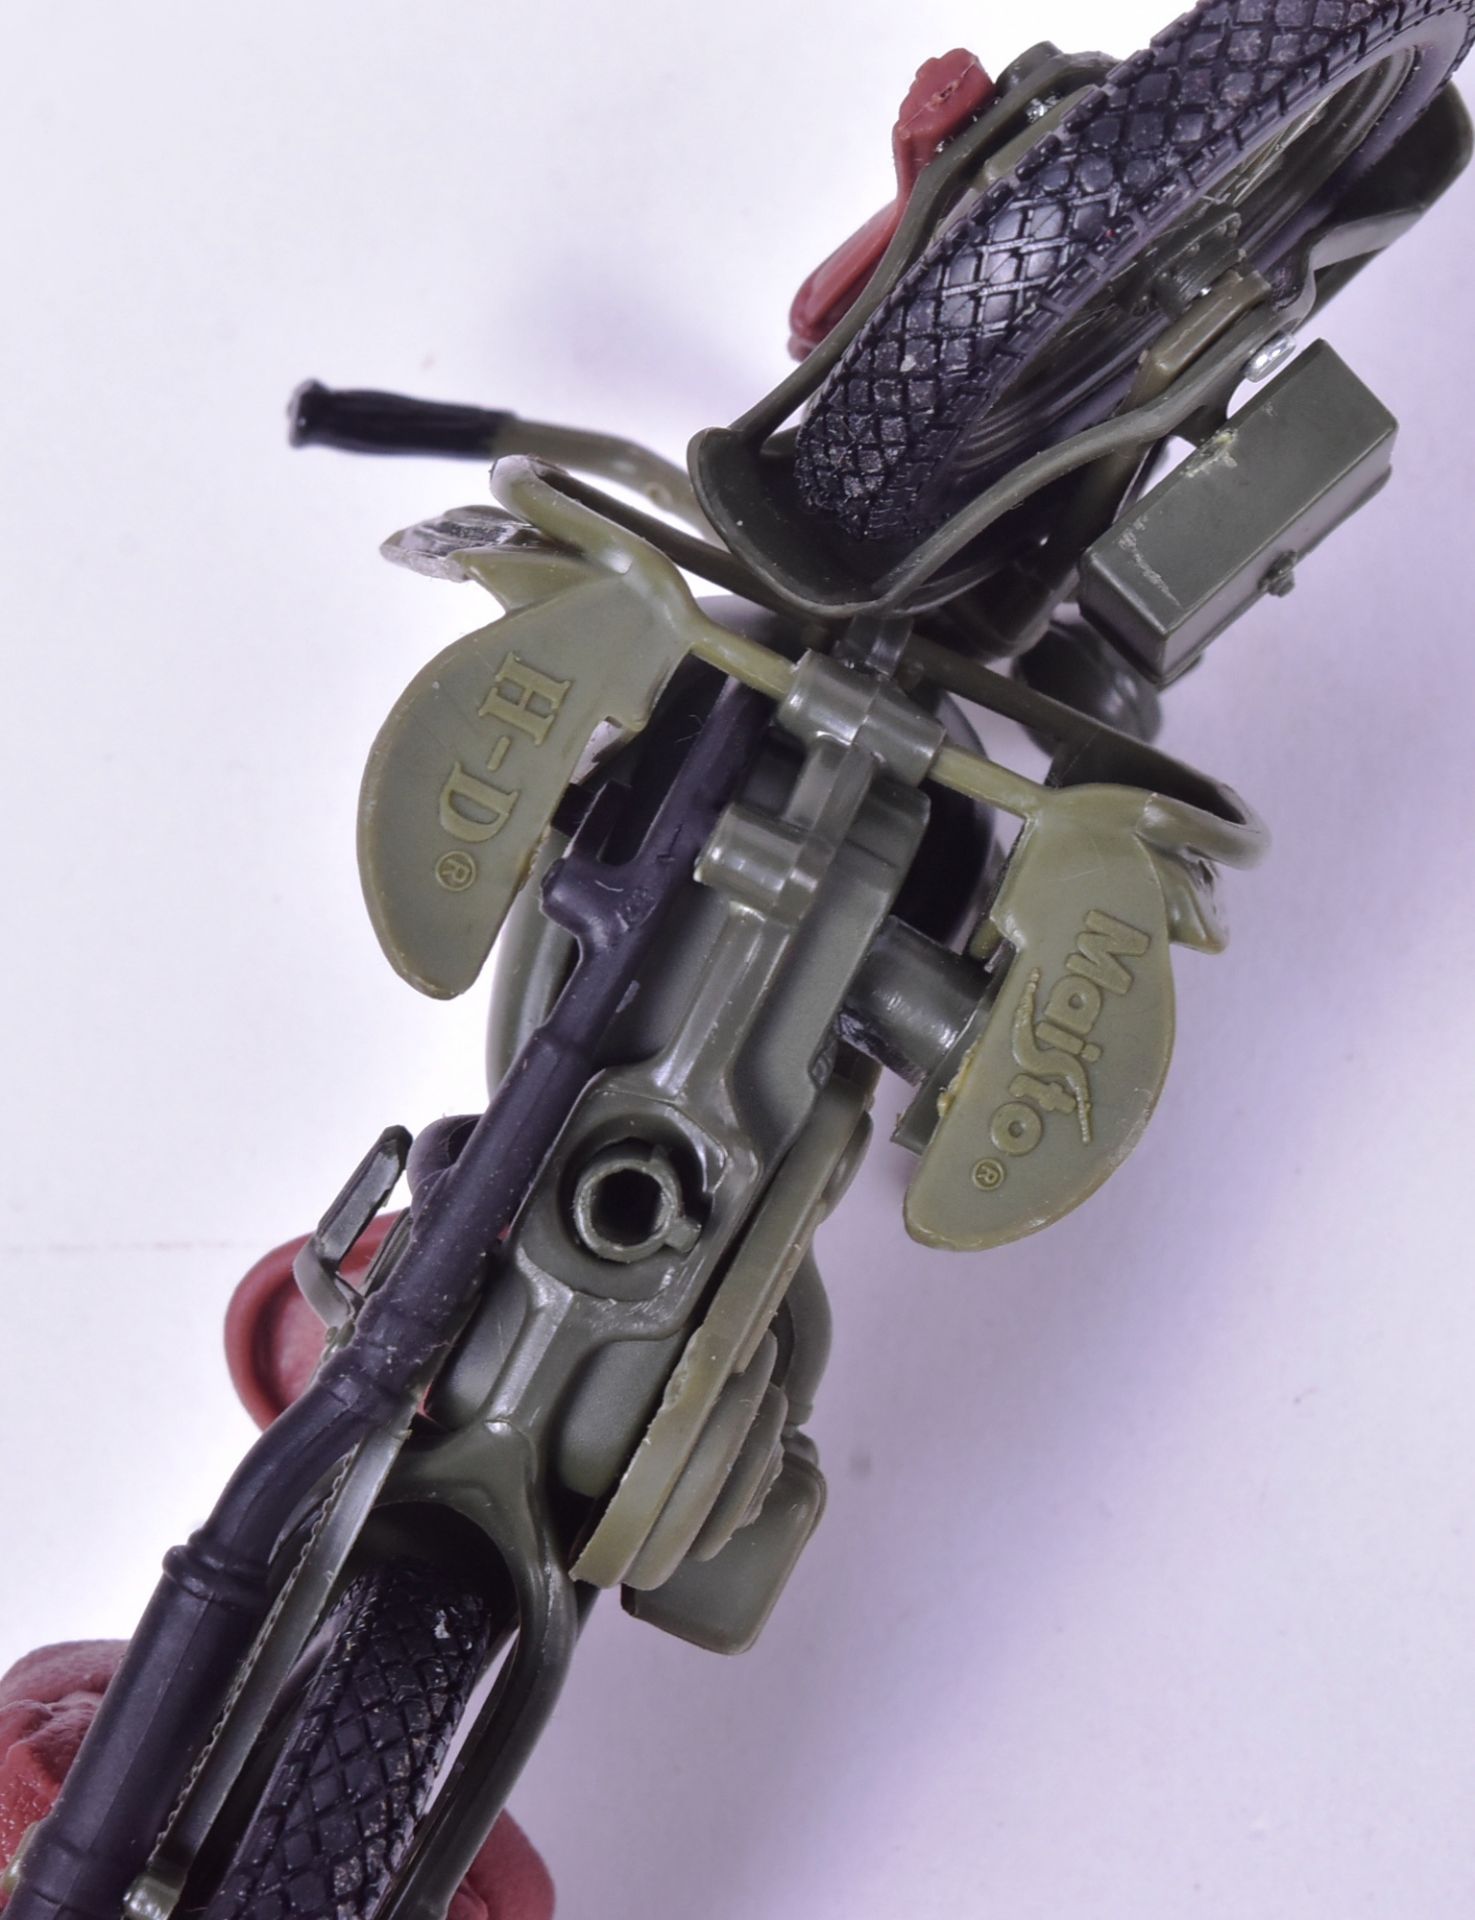 DIECAST - COLLECTION OF MOTORCYCLE MODELS - Image 7 of 7